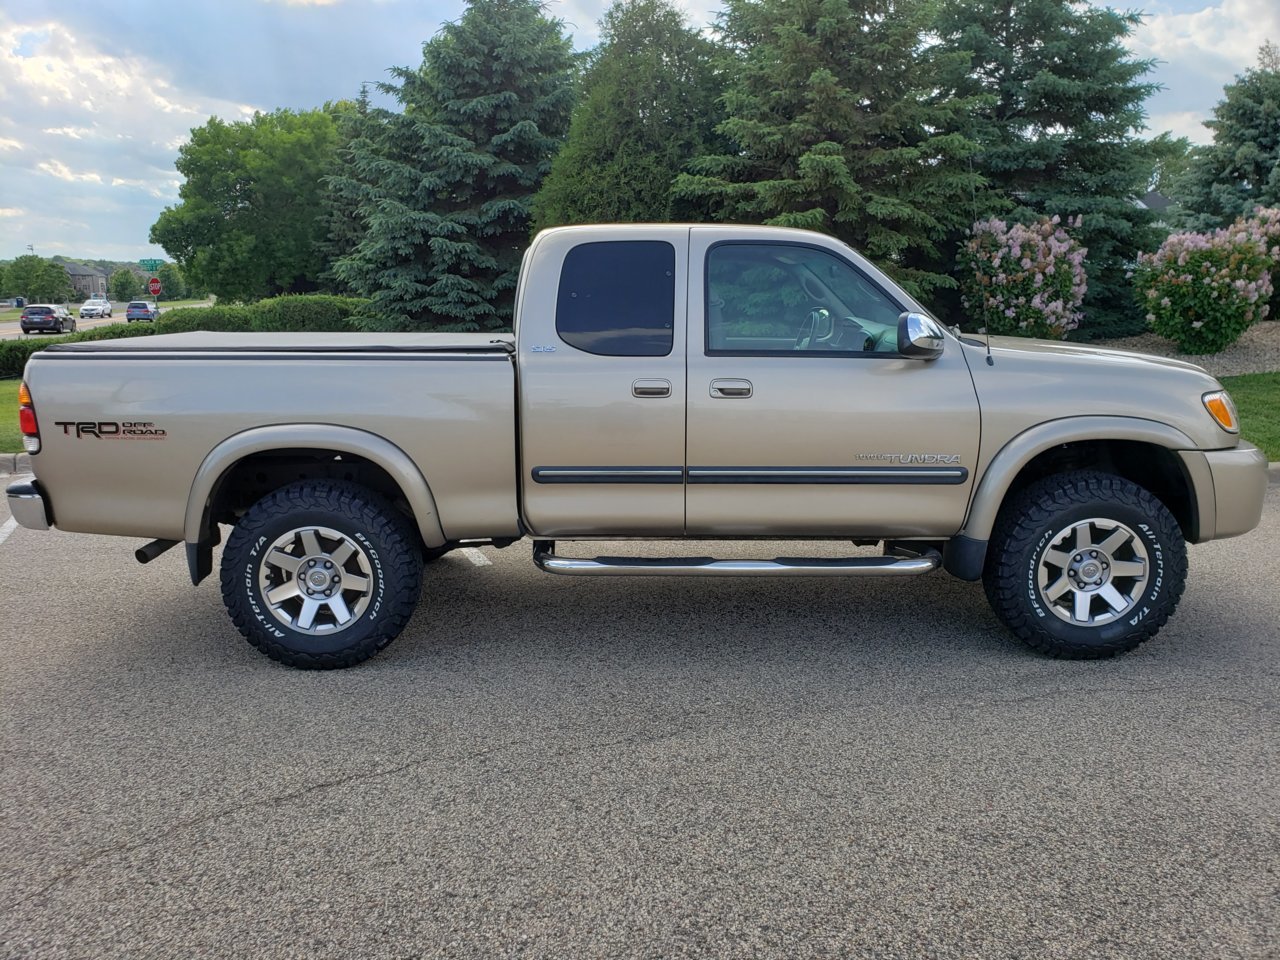 Just purchased 2006 w/54k miles - questions | Toyota Tundra Forum